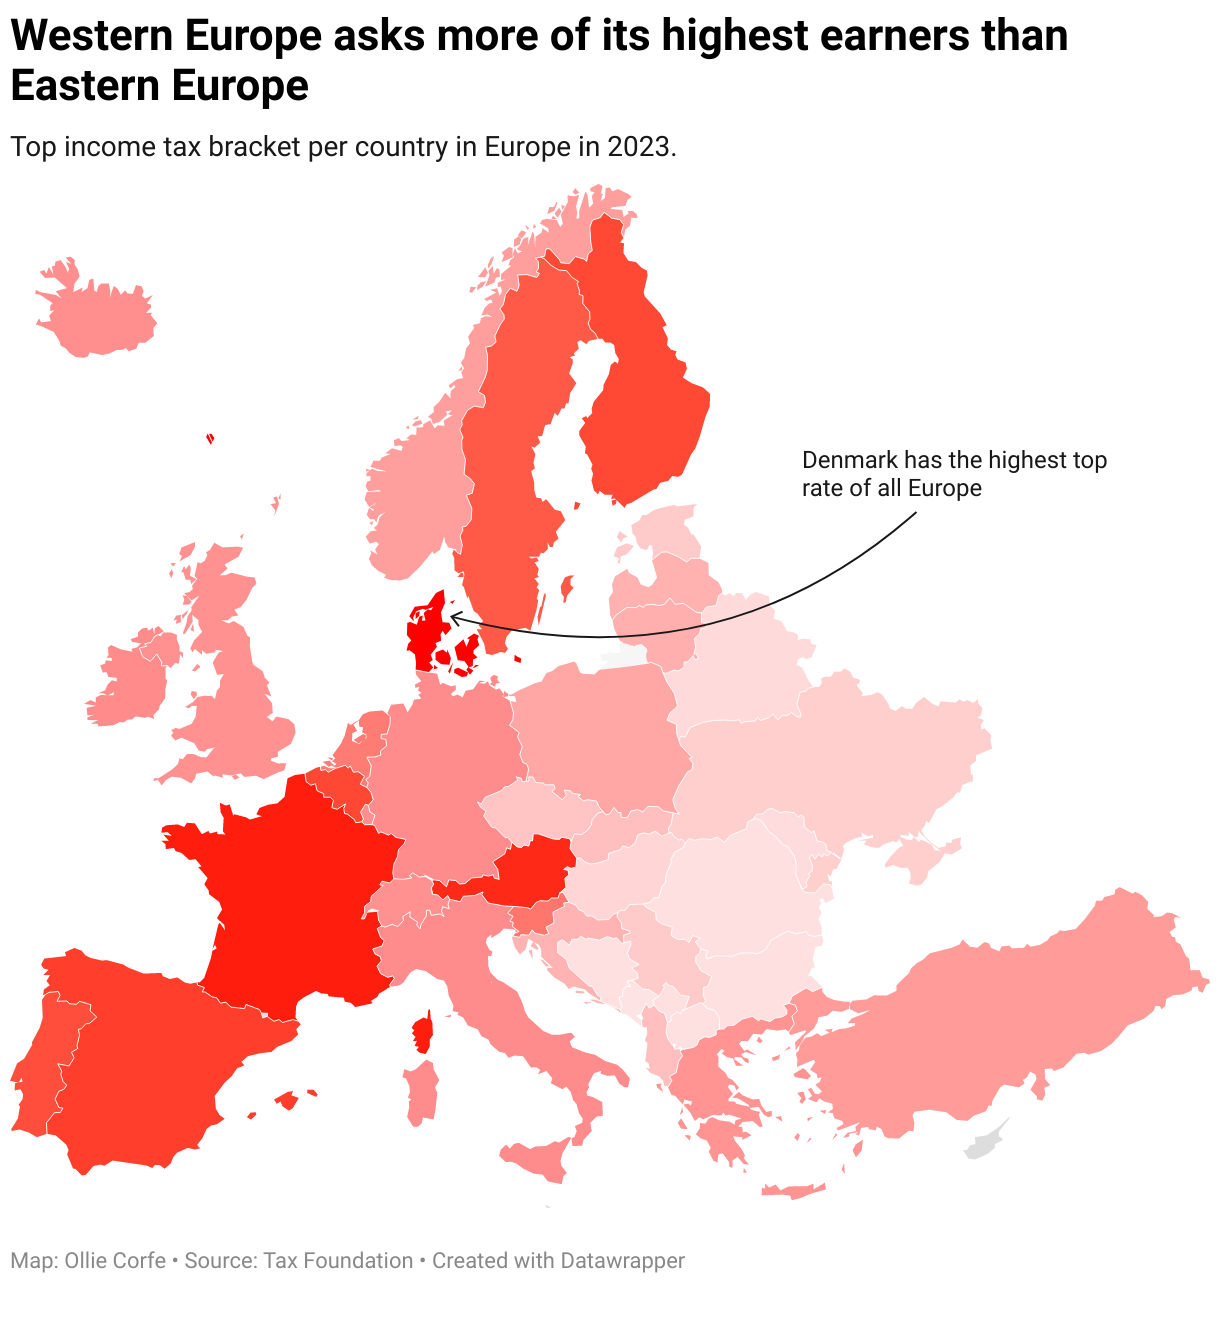 Map of Europe by income tax bracket.